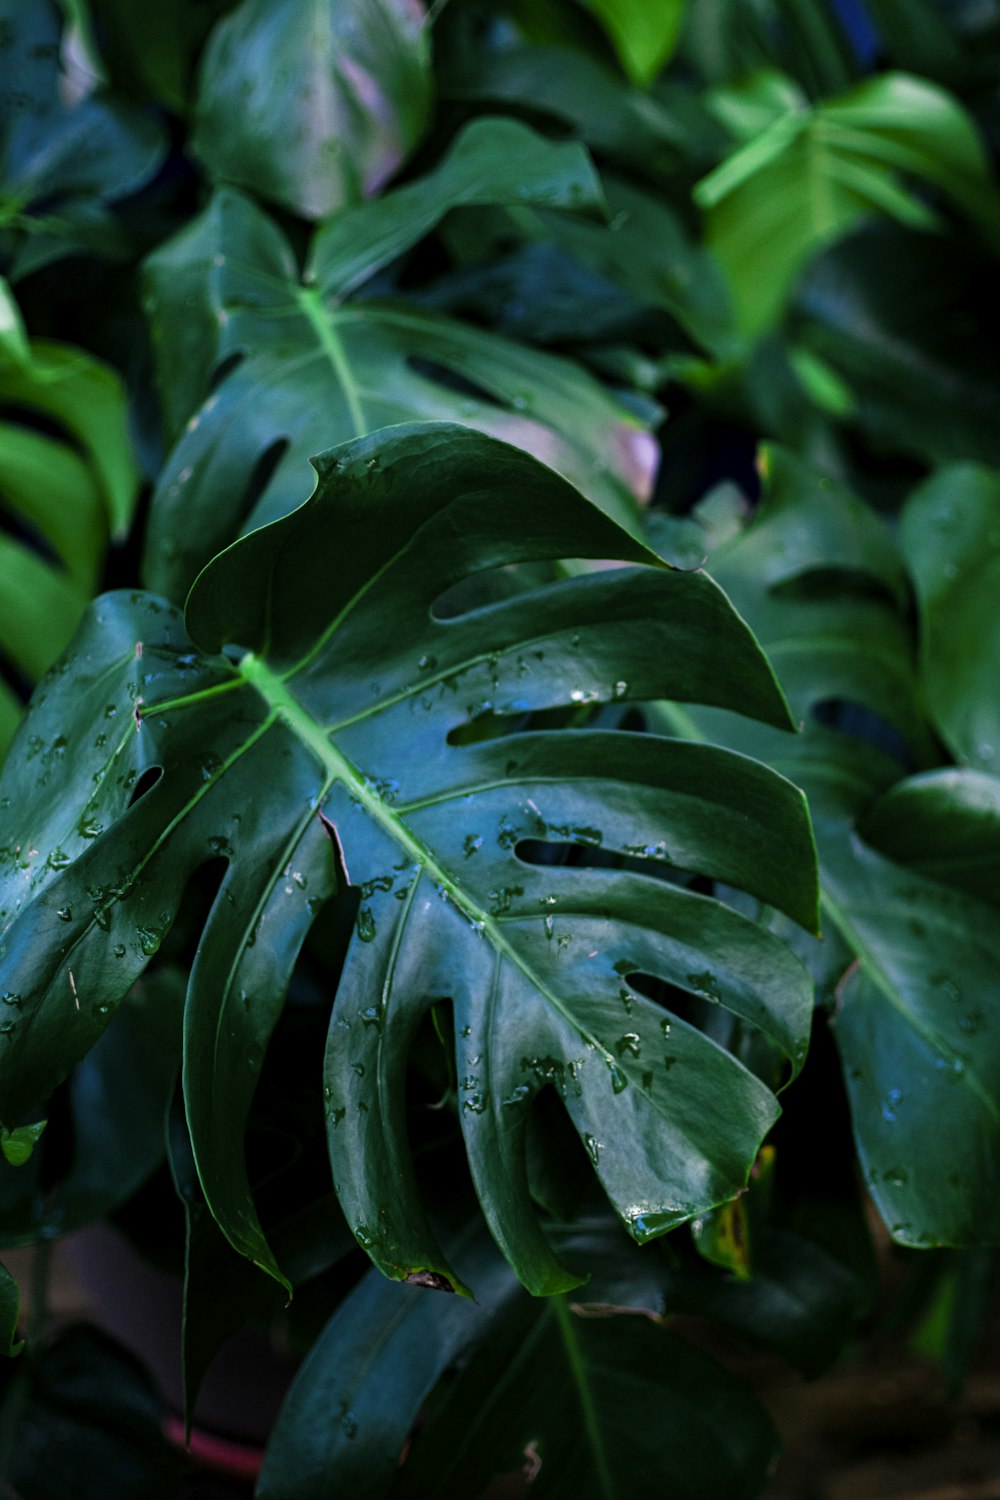 green-leafed plant in close-up photography